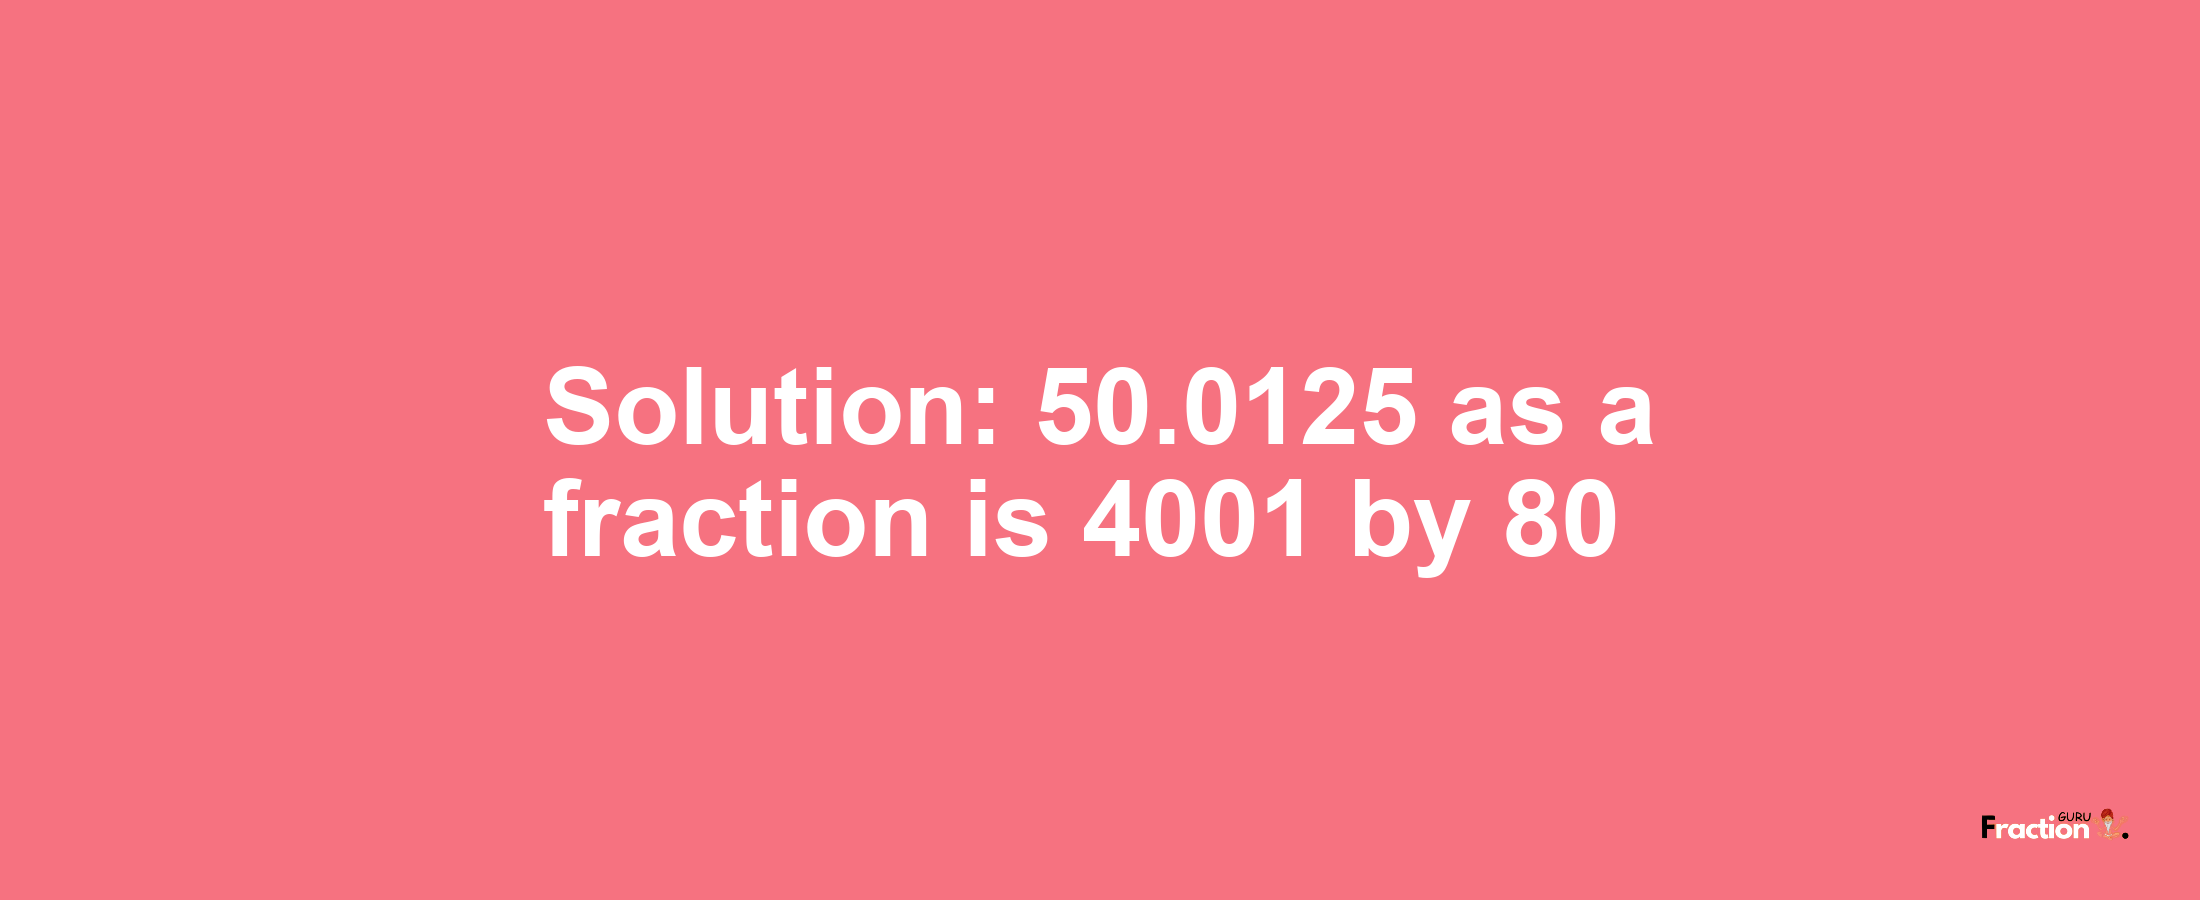 Solution:50.0125 as a fraction is 4001/80